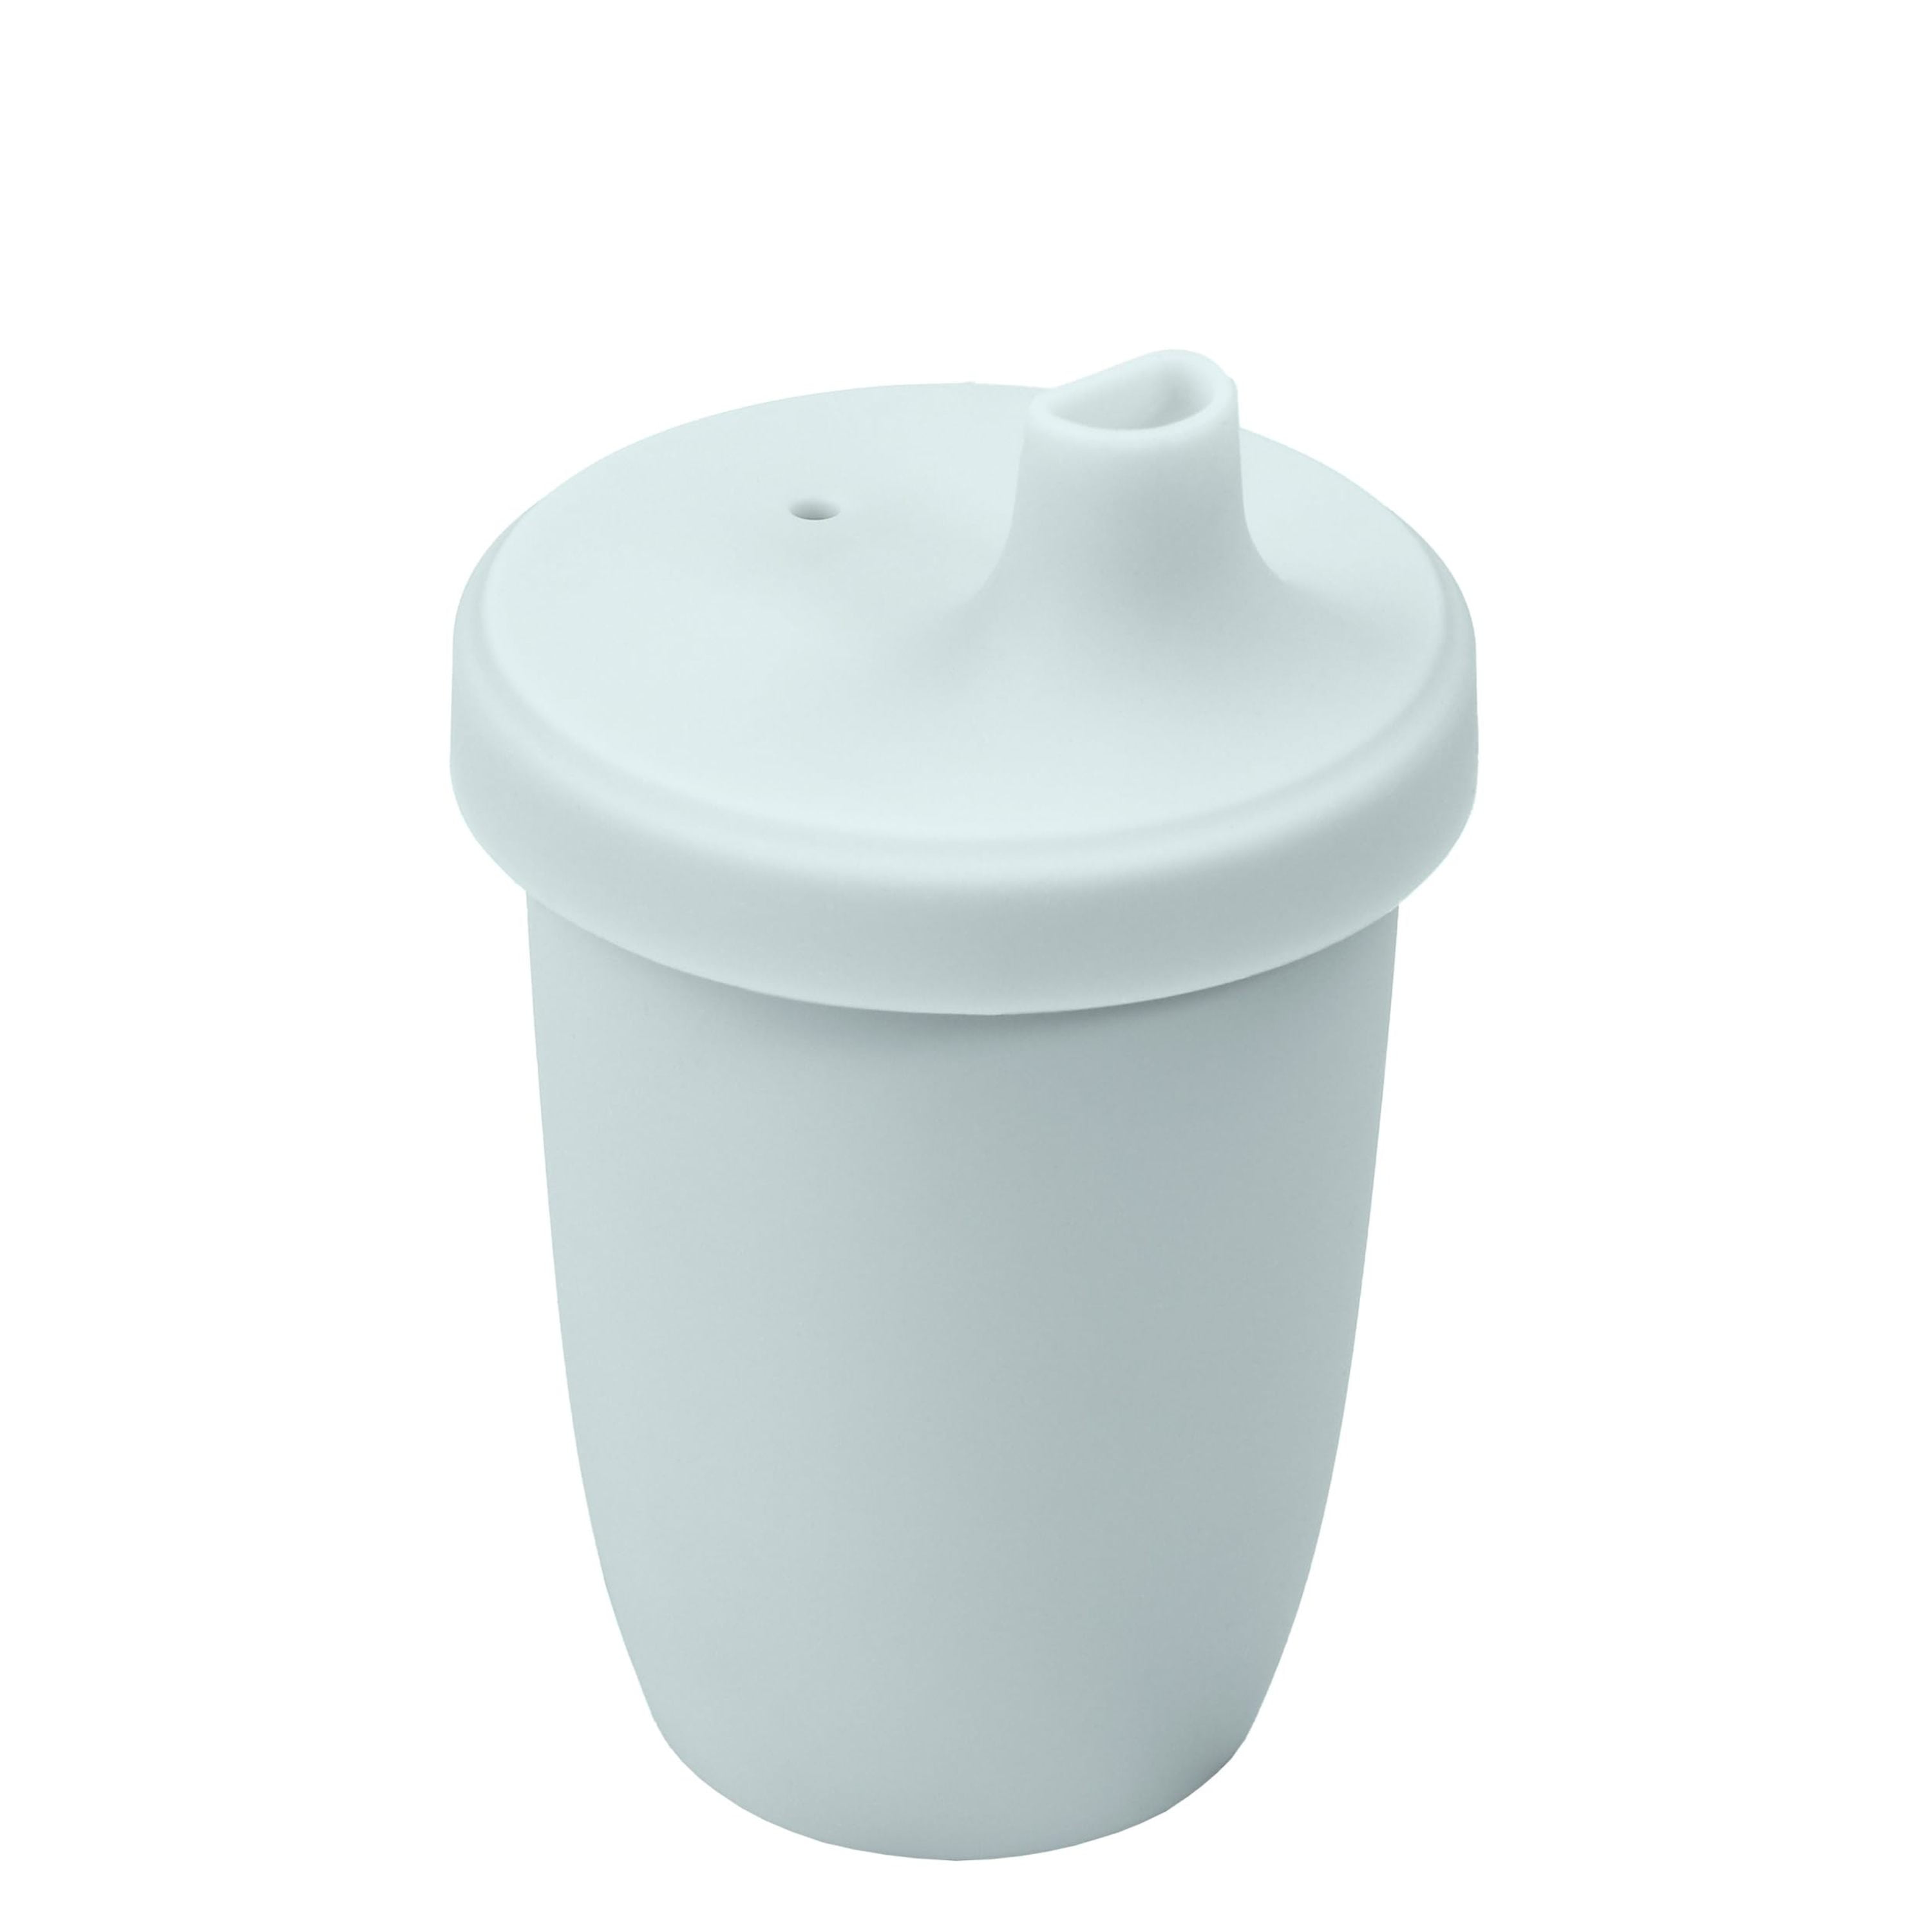 Weighted cup, no-spill lid 8 oz.